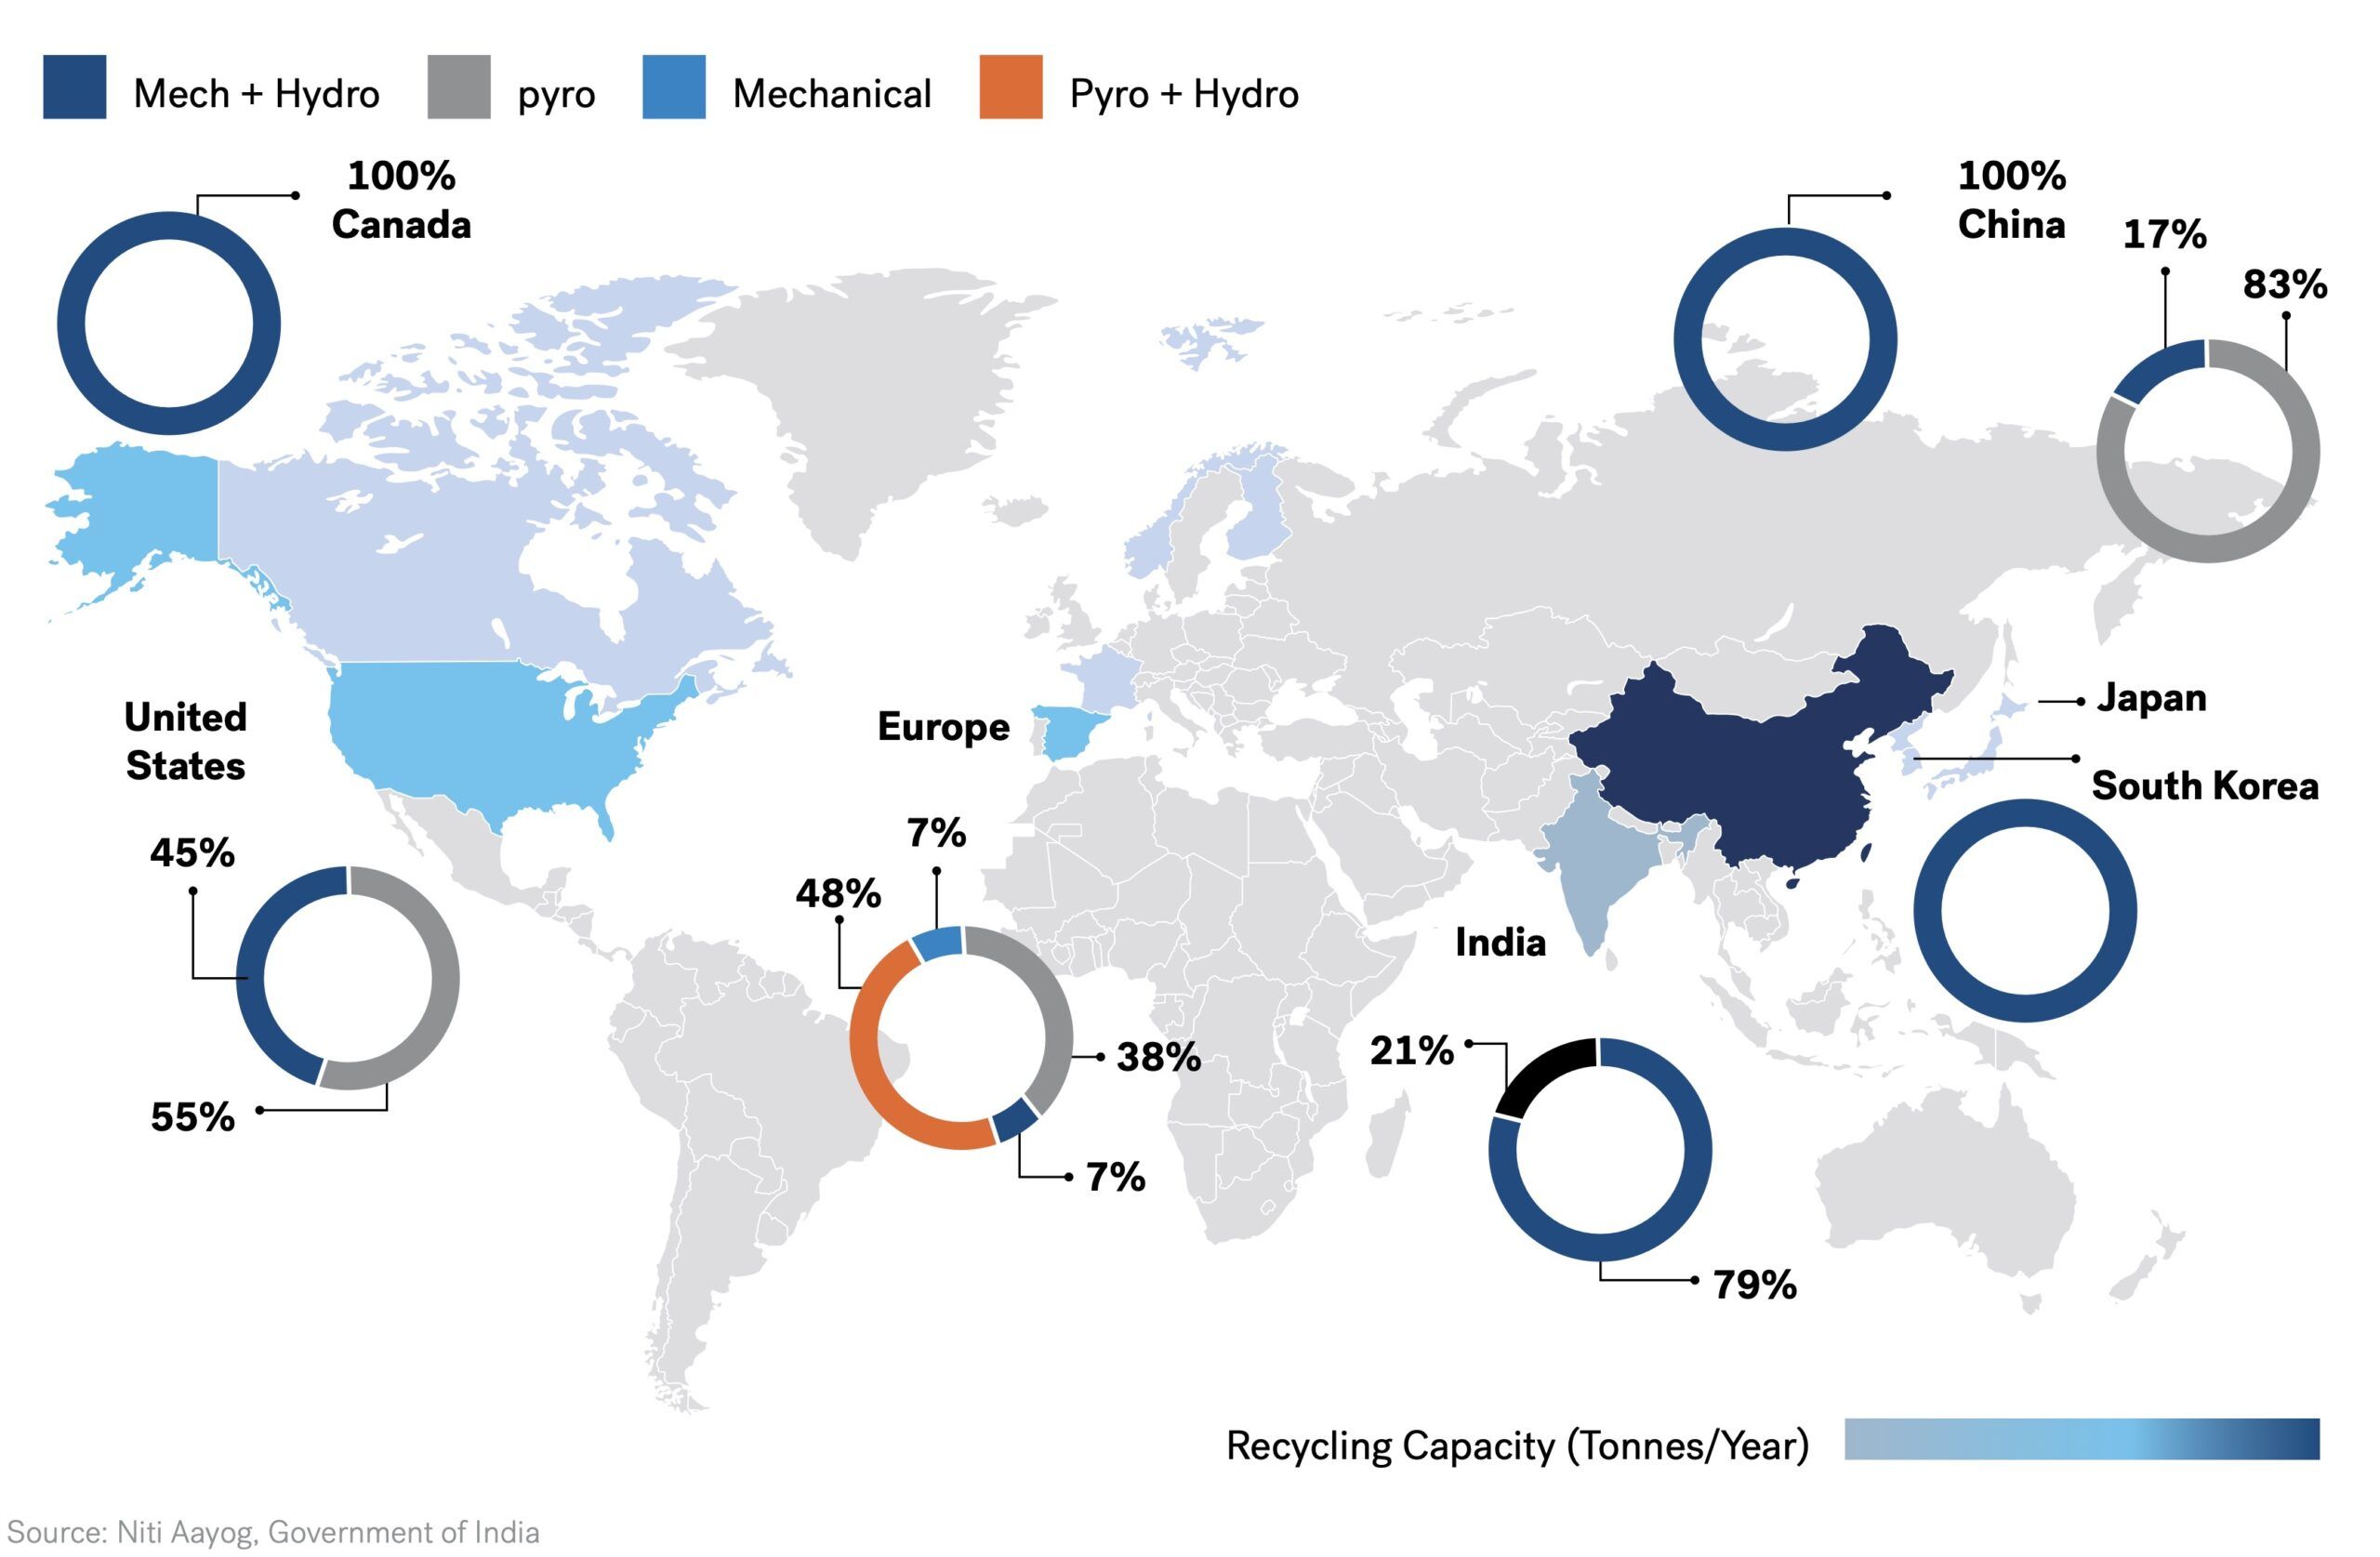 Gigafactory - Global Recycling Capacity by Technology